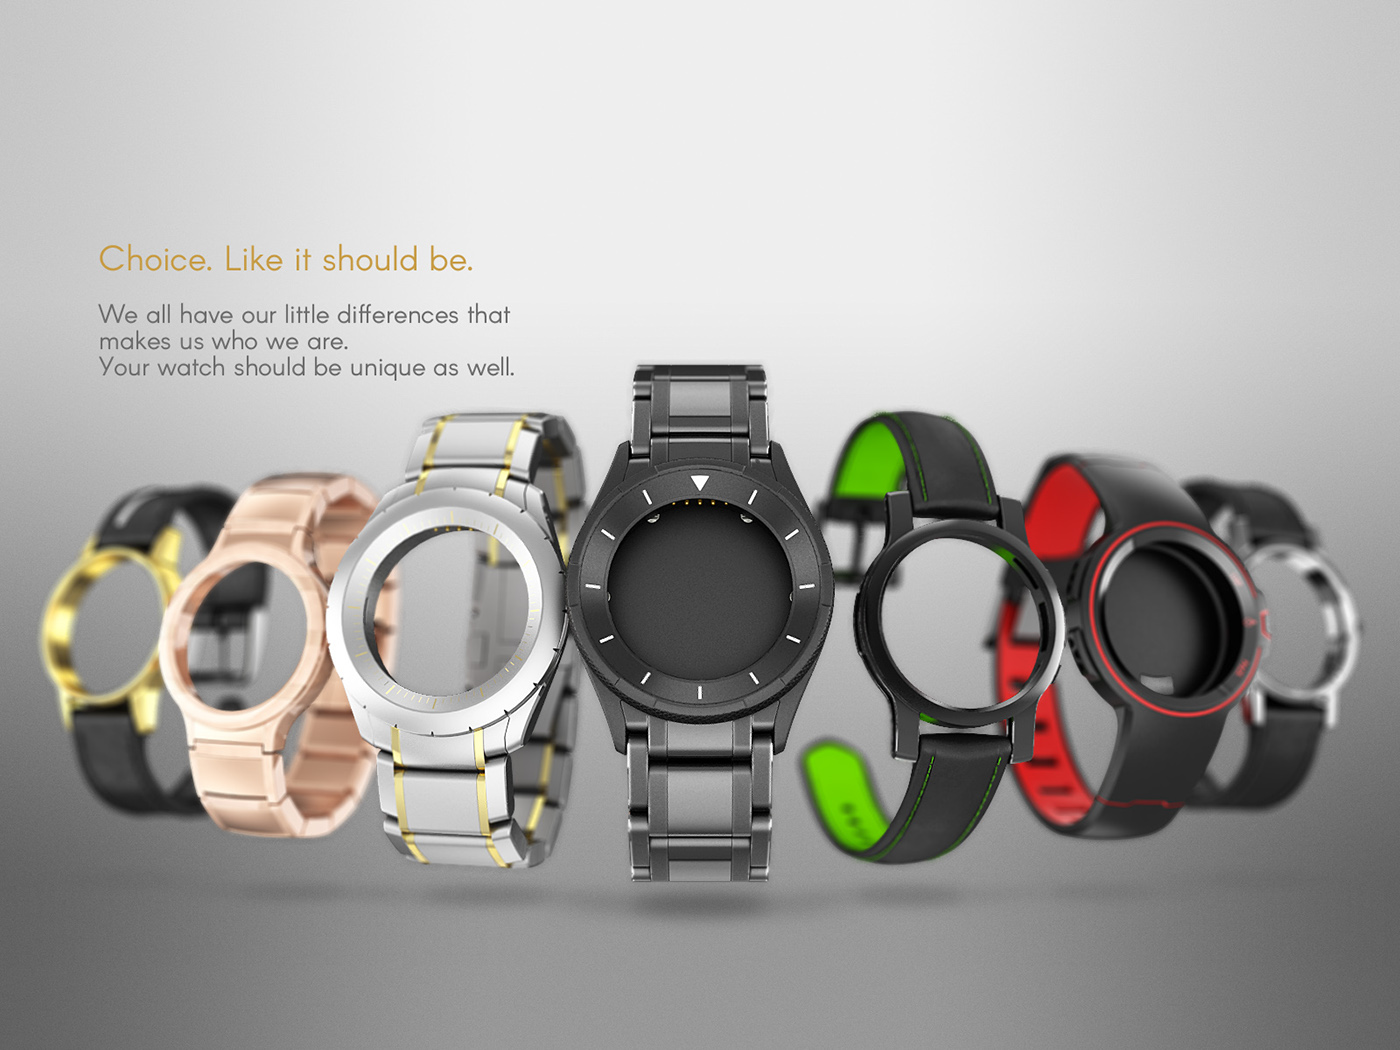 smartwatch wearables Wearable android Android Wear smartwatches modular watch Watches